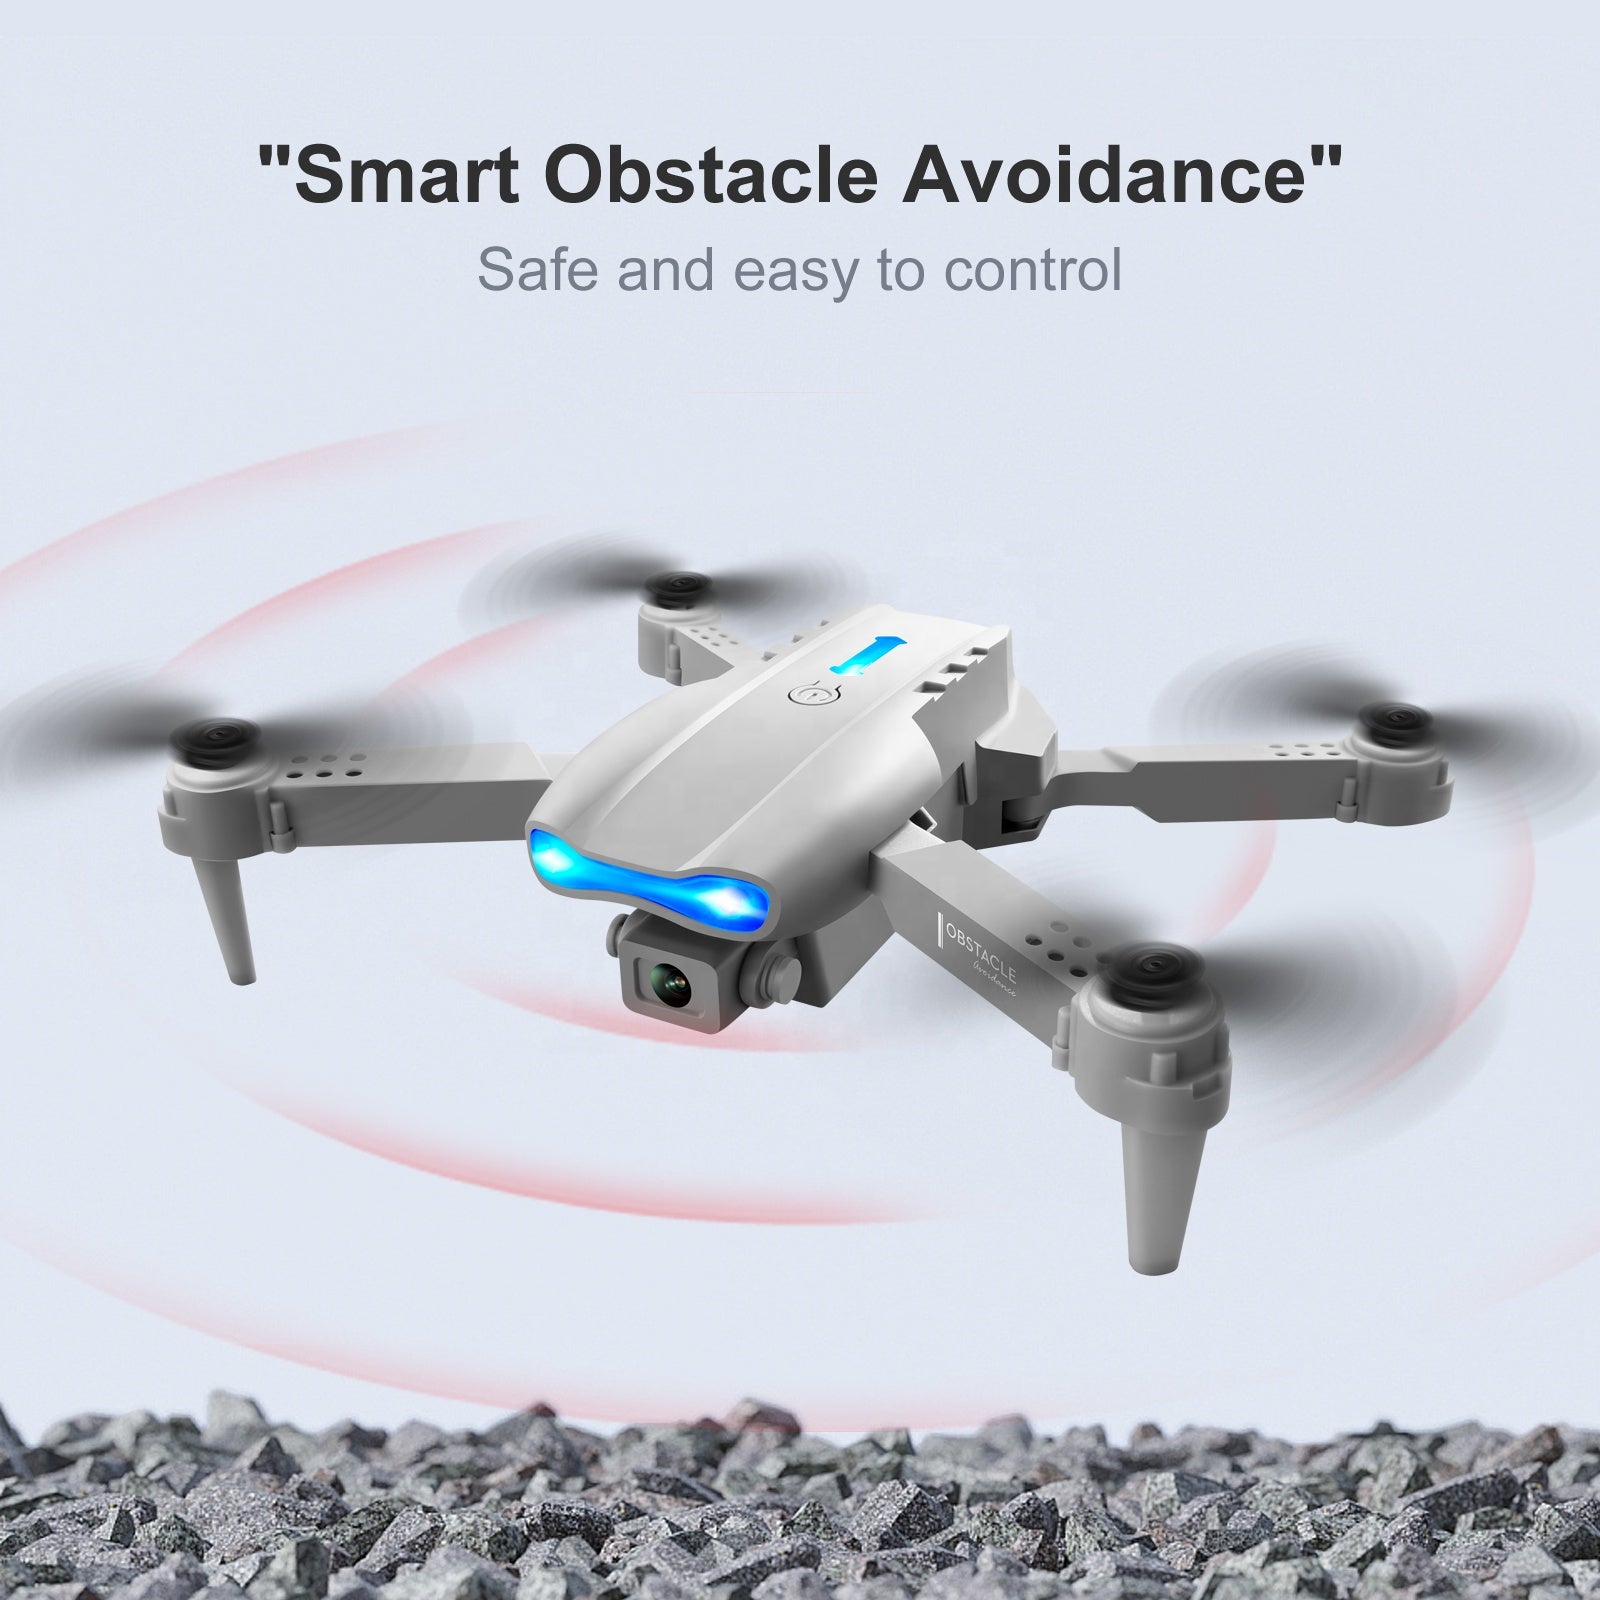 E99 PRO2 Drone, "smart obstacle avoidance" ds [oest